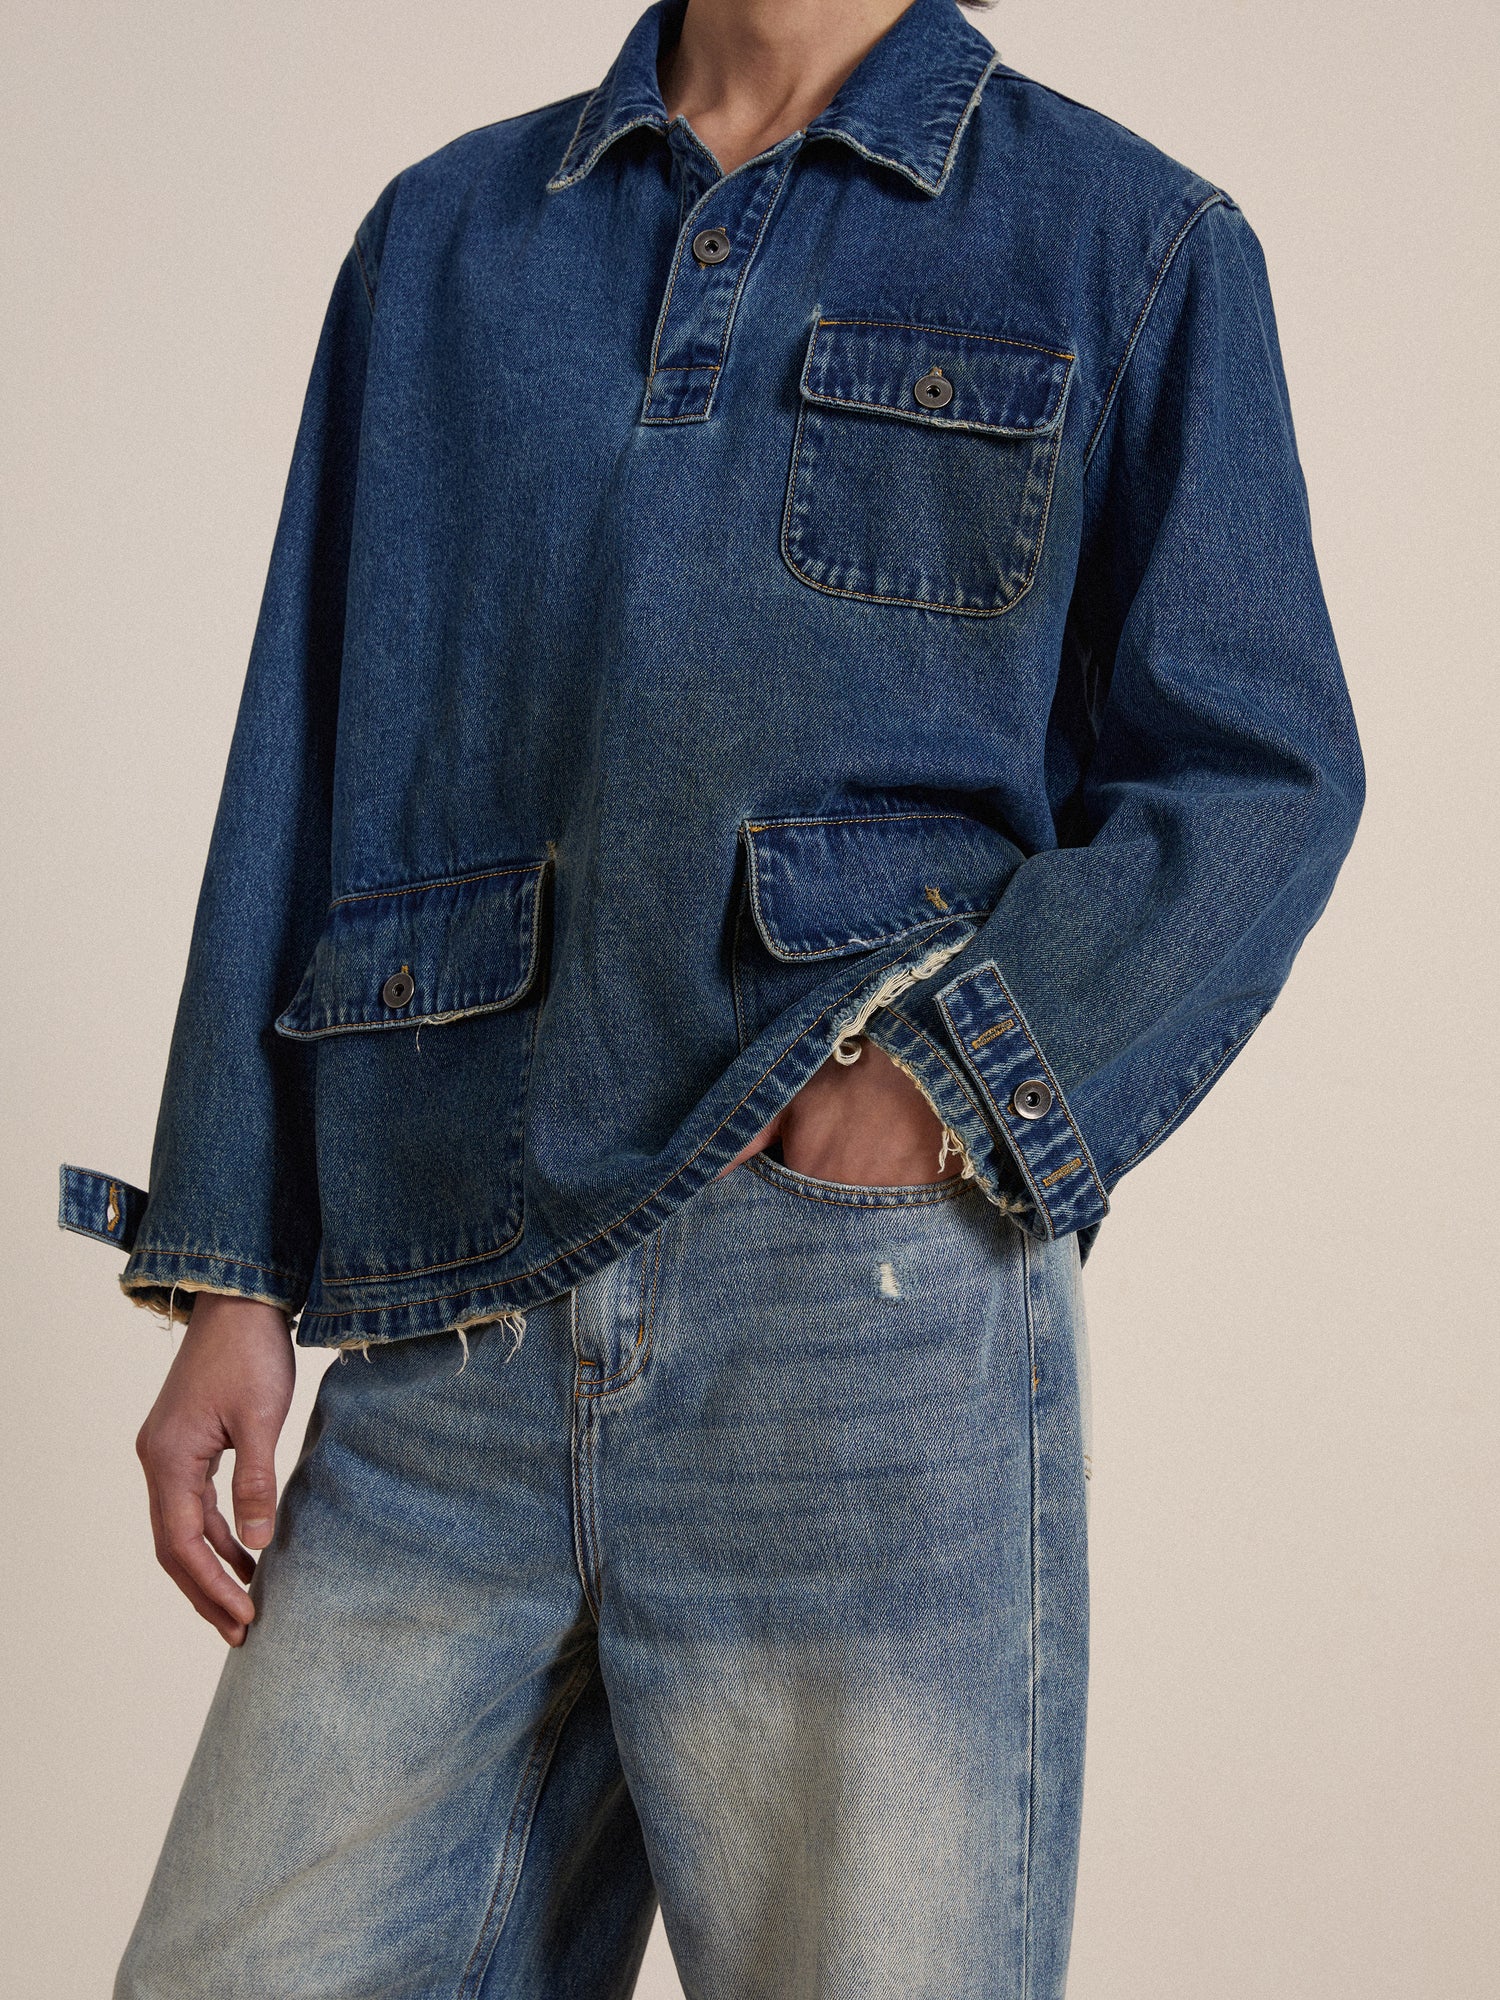 A person wearing a Azin Denim Pullover Work Shirt pullover work shirt and jeans made from premium denim fabric, with a focus on the textured details of the fabric.